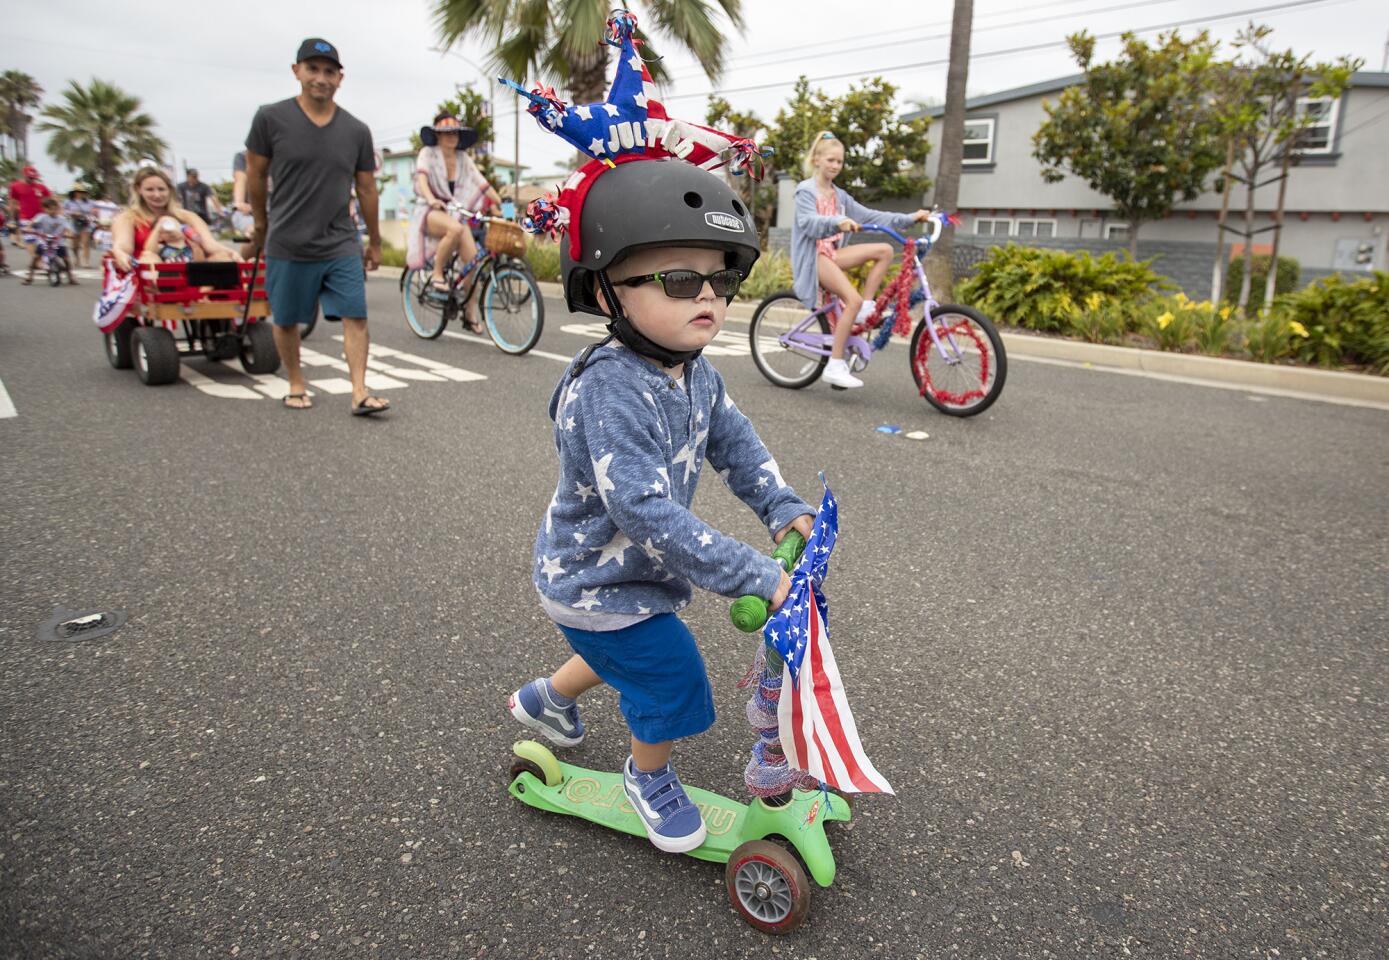 Van Newton, 2, rides his deorated scooter along Balboa Boulevard during the annual Newport Peninsula Bike Parade on Thursday, July 4.